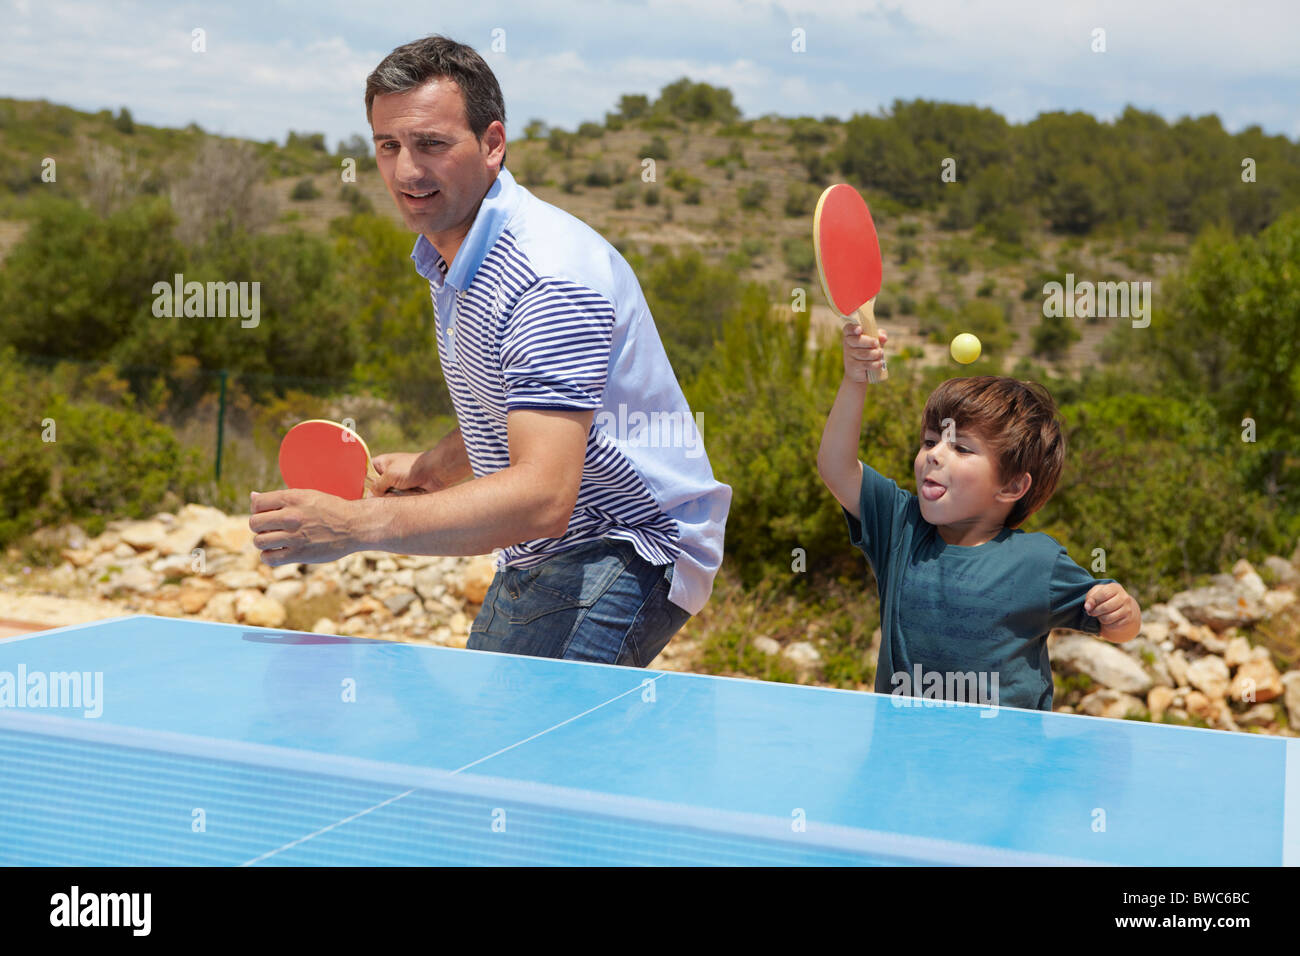 Father and son playing table tennis Stock Photo